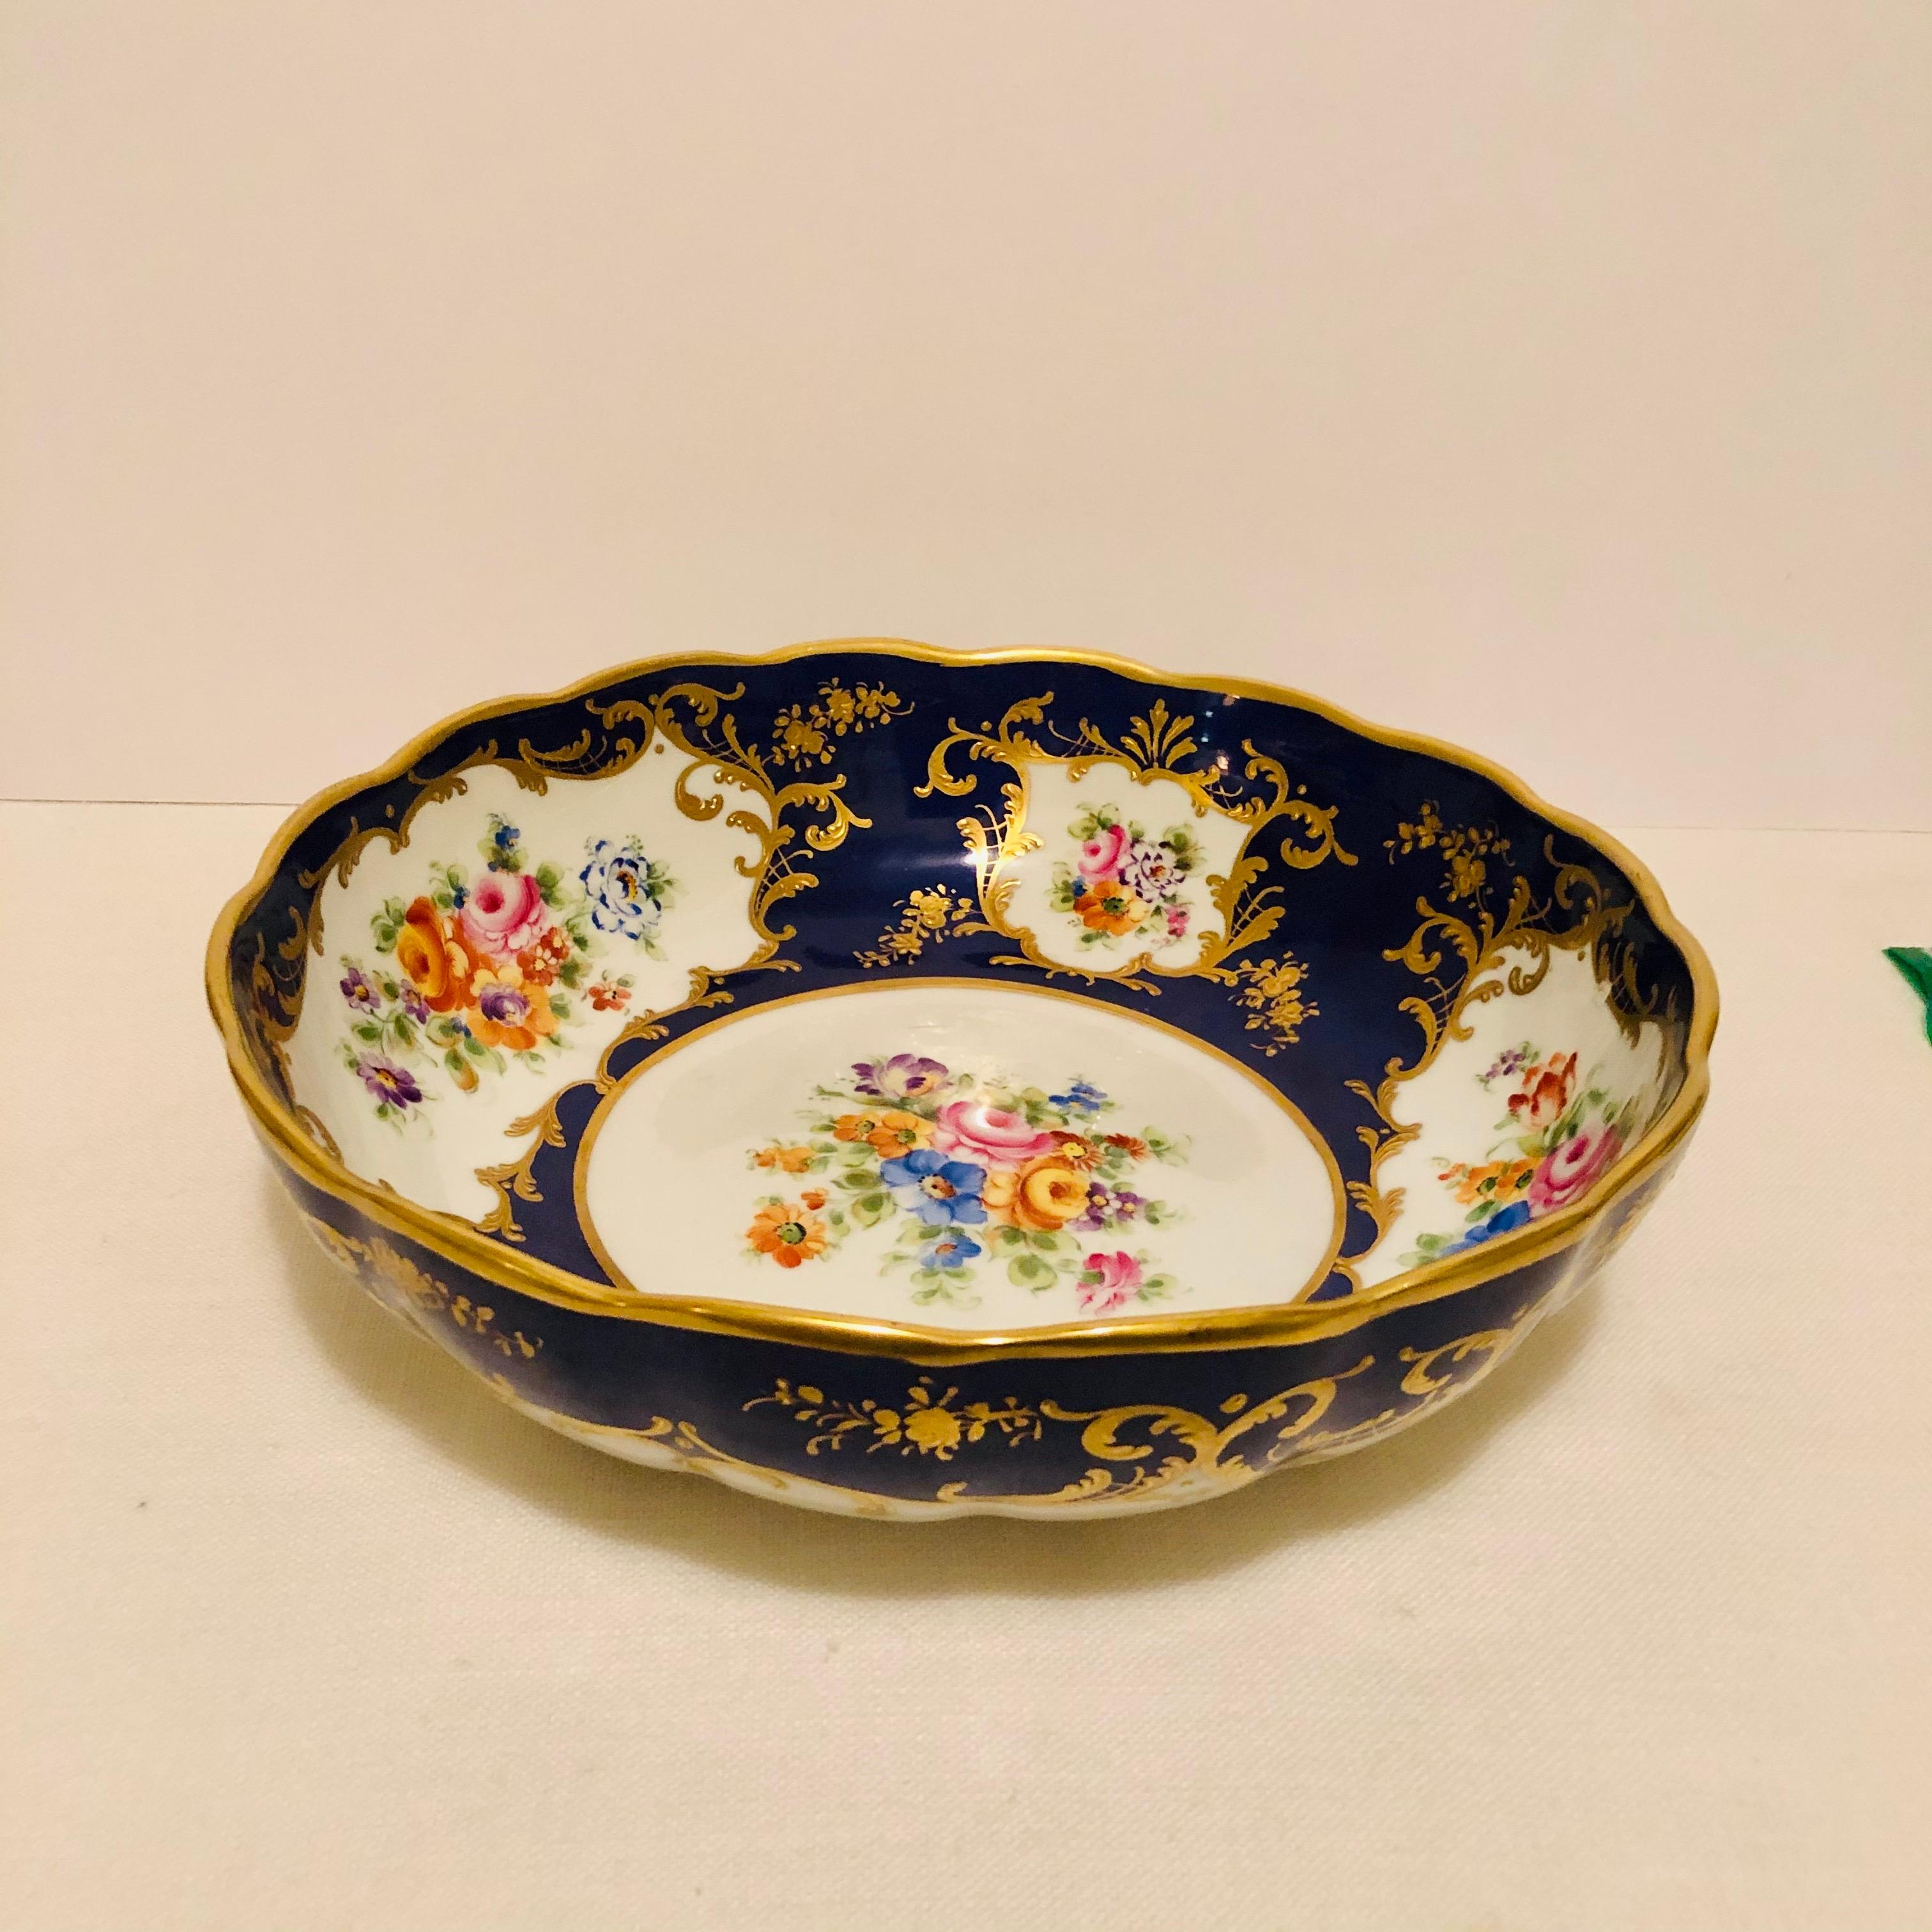 Romantic Le Tallec Blue Bowl with Painted Central Flower Bouquet and 4 Flower Medallions